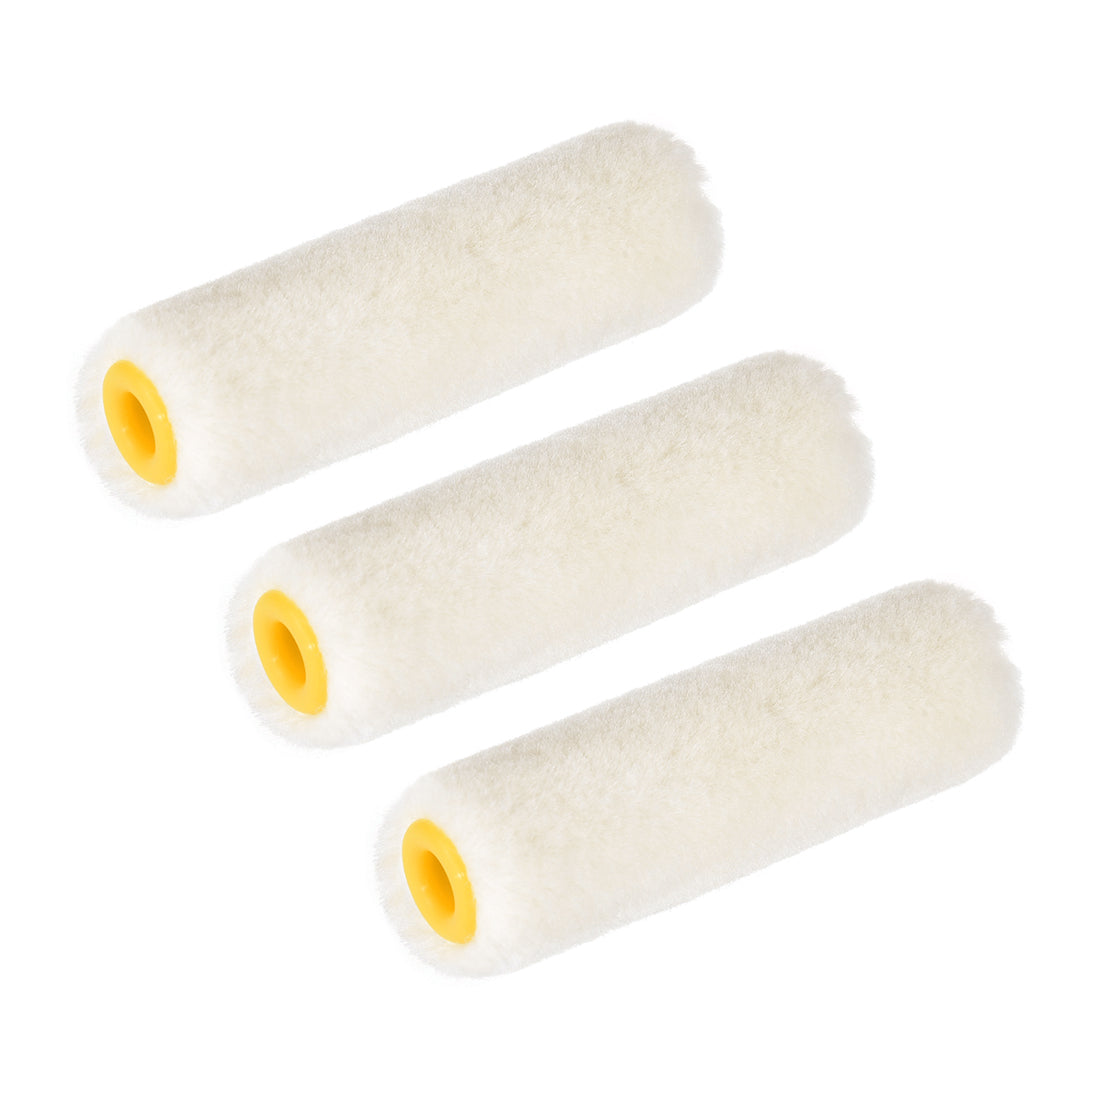 uxcell Uxcell Paint Roller Cover 3 Inch 75mm Mini Wool Brush for Household Wall Painting Treatment 3pcs